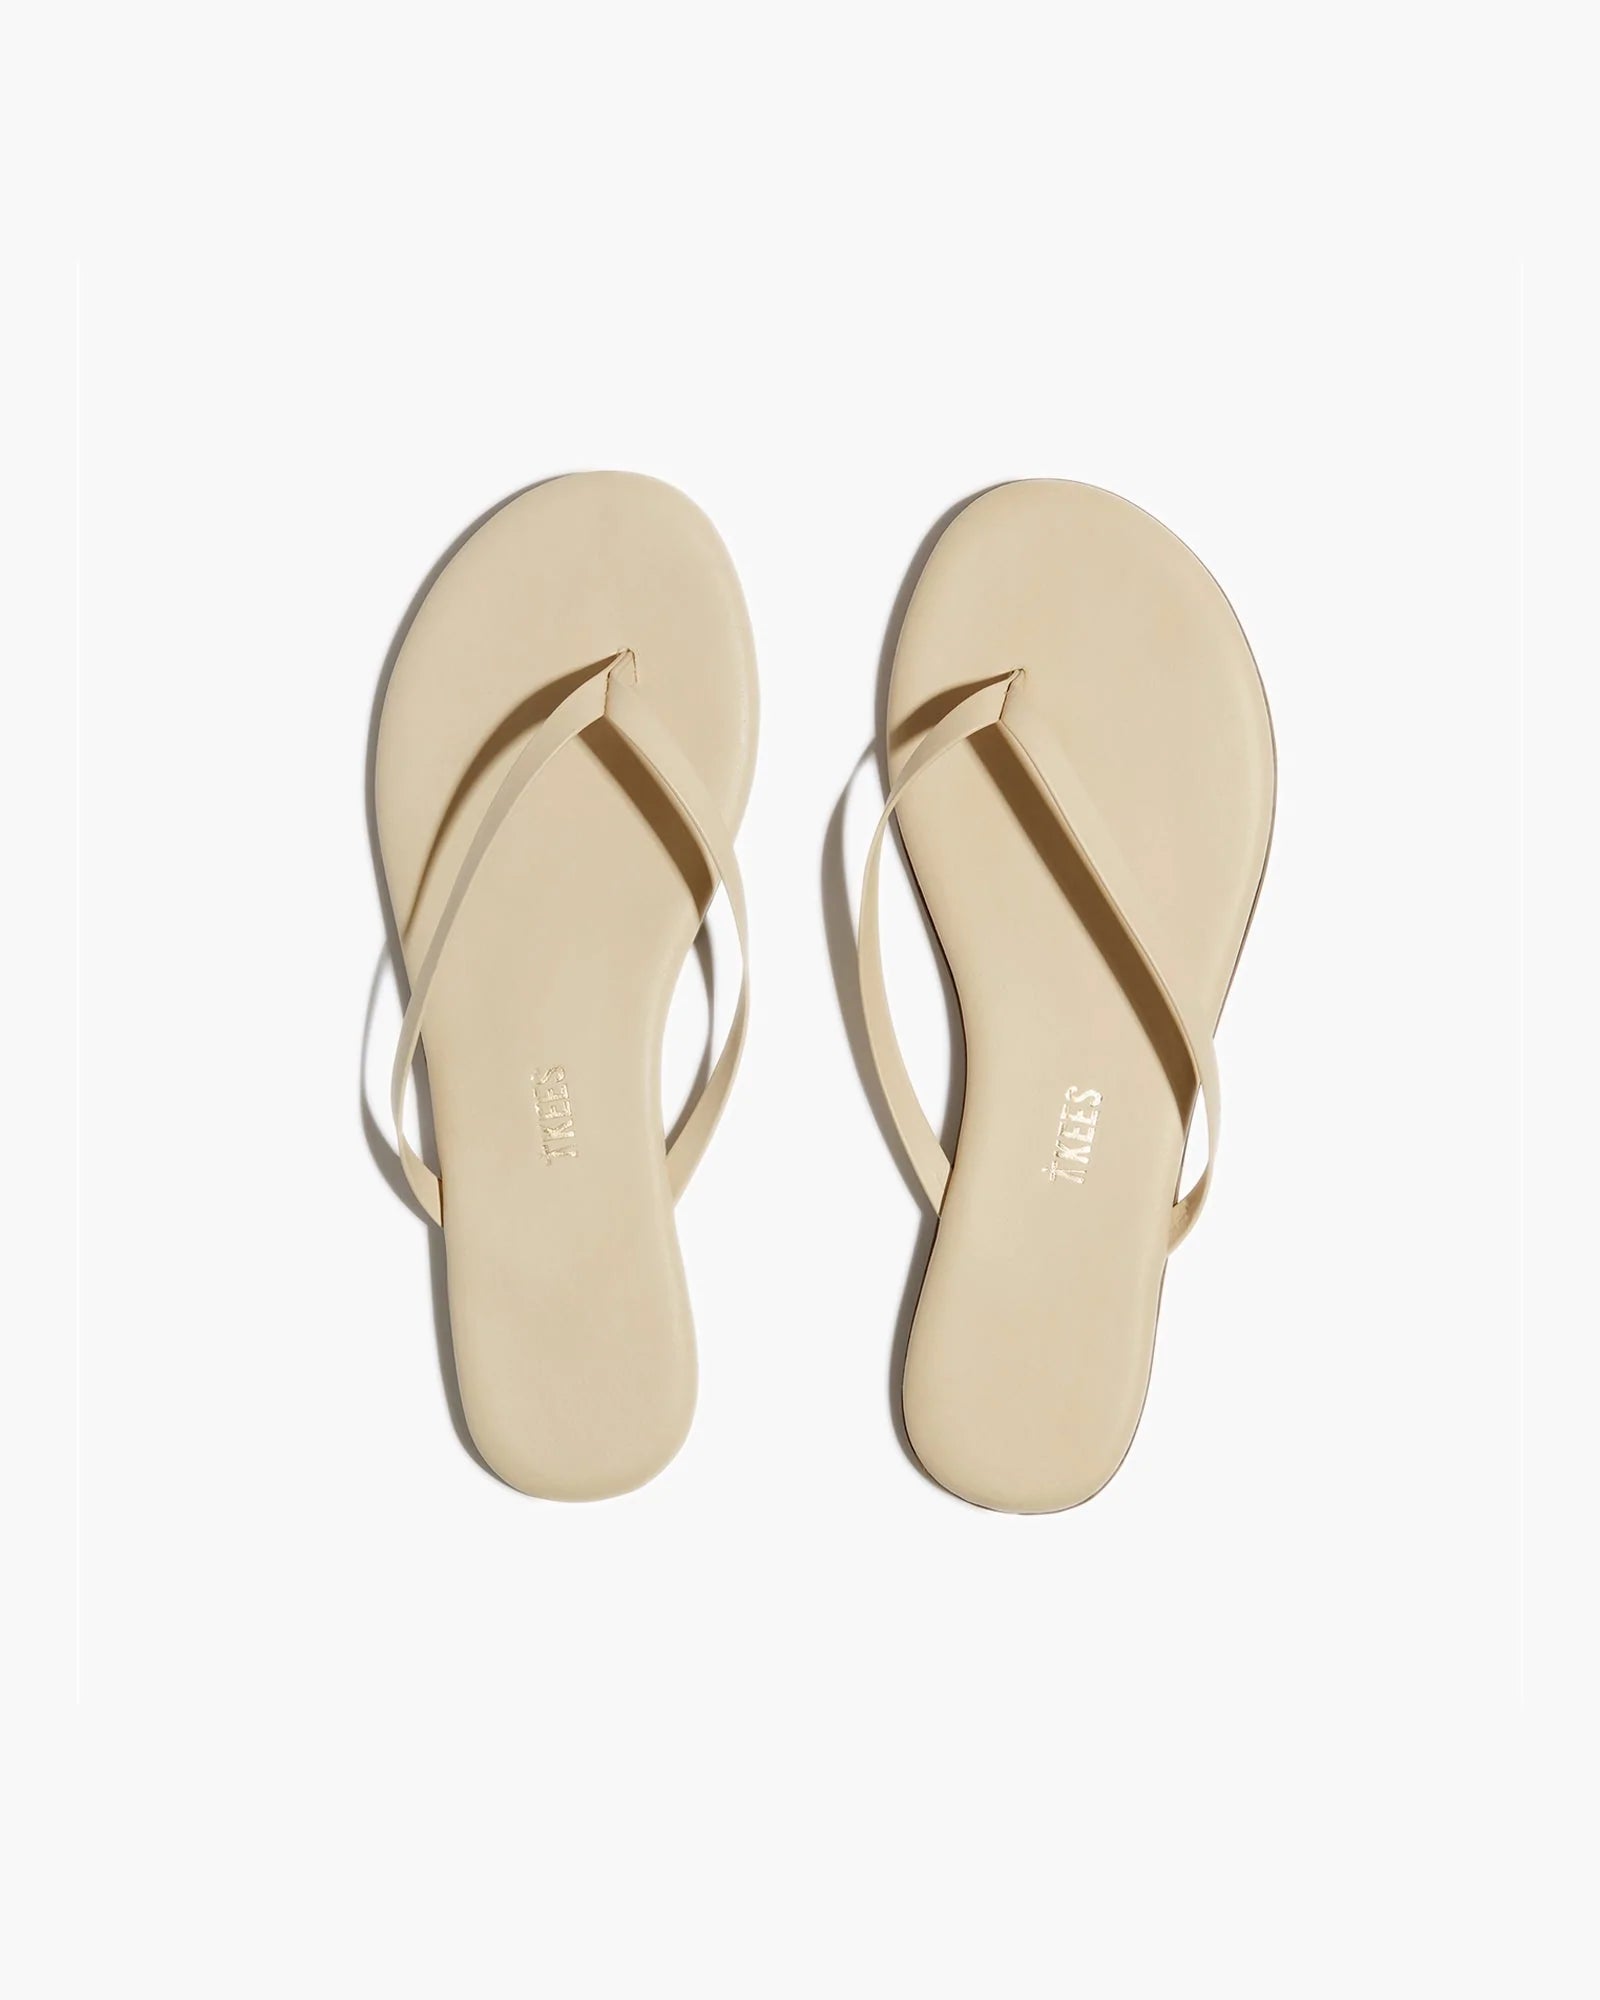 White Women's's's's's's's's's's's's's's's's's's's's's's TKEES Lily Nudes Flip Flops | BFGMIU918